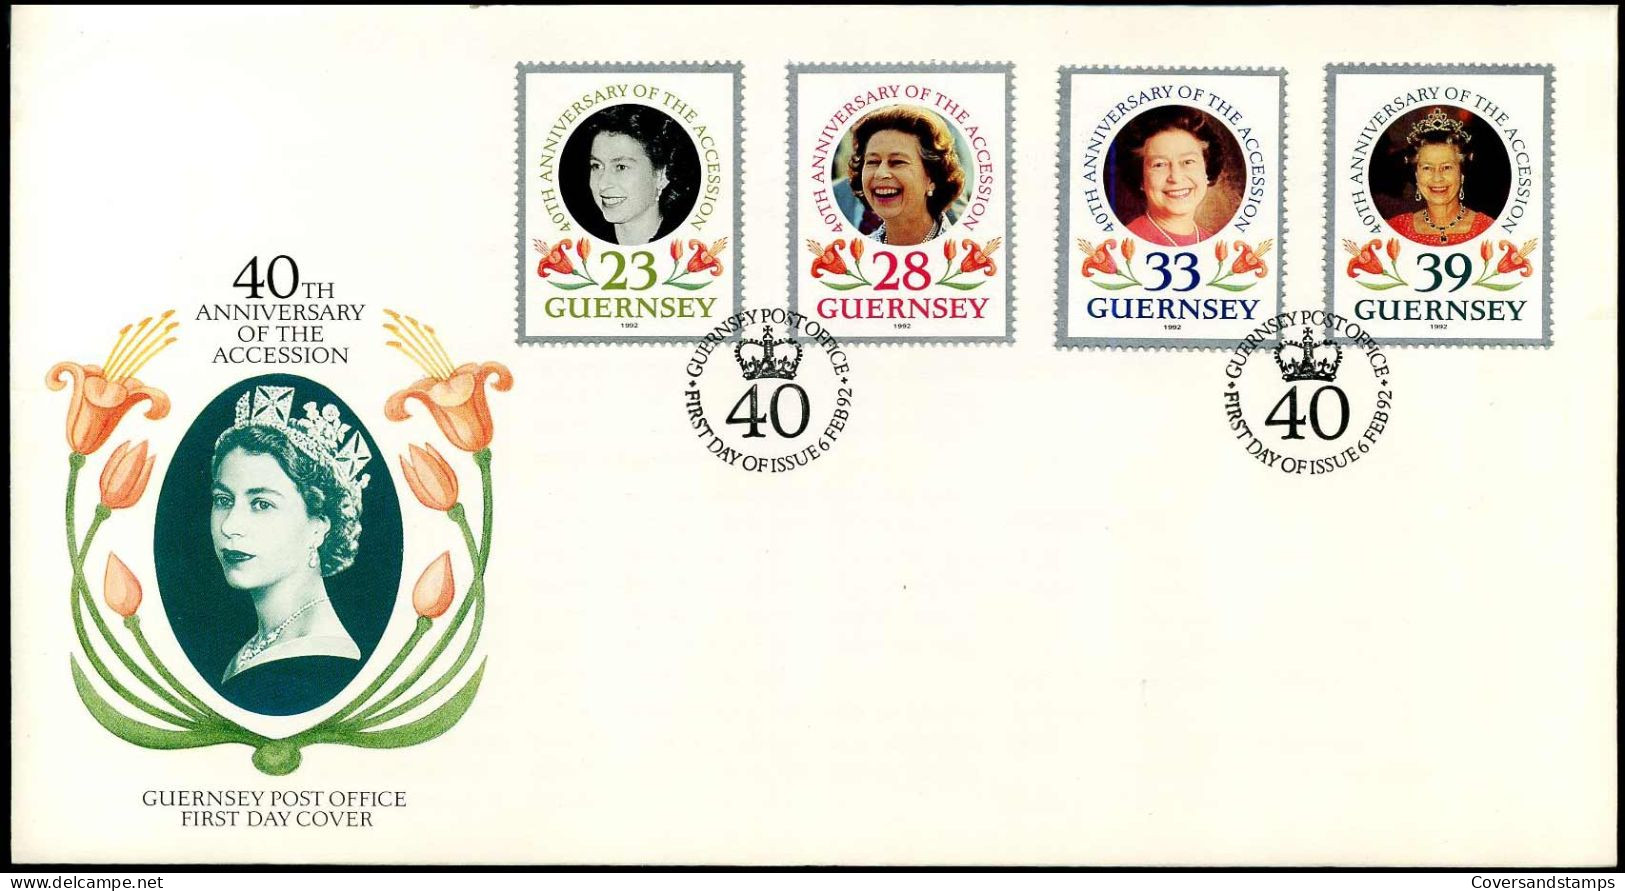 FDC - 40th Anniversary Of The Accession - The Queen - Guernsey